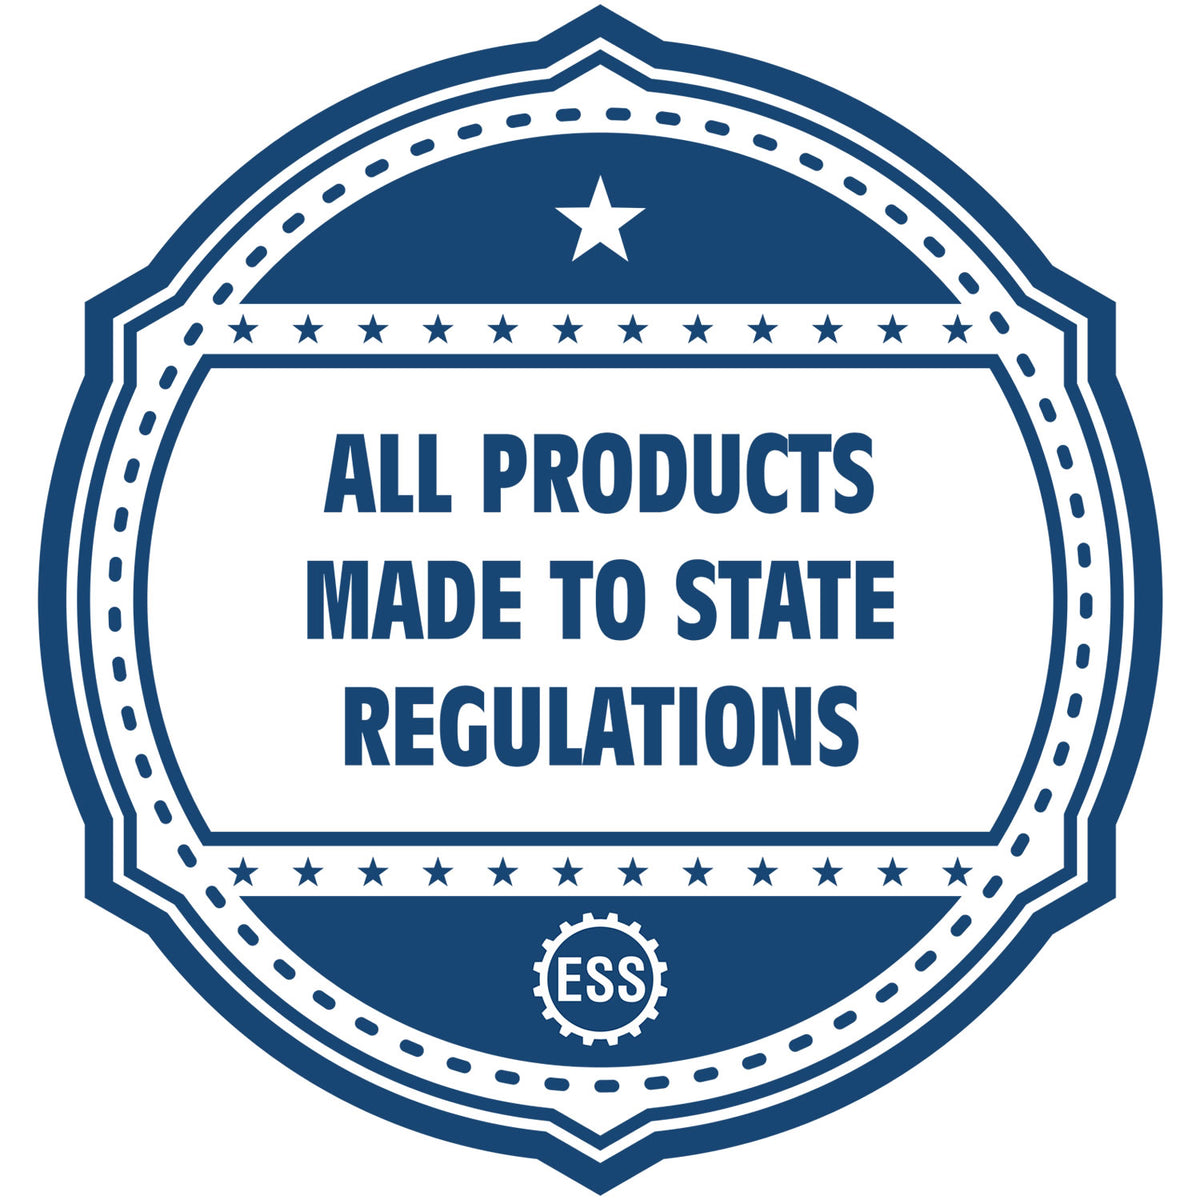 An icon or badge element for the Handheld Kentucky Architect Seal Embosser showing that this product is made in compliance with state regulations.